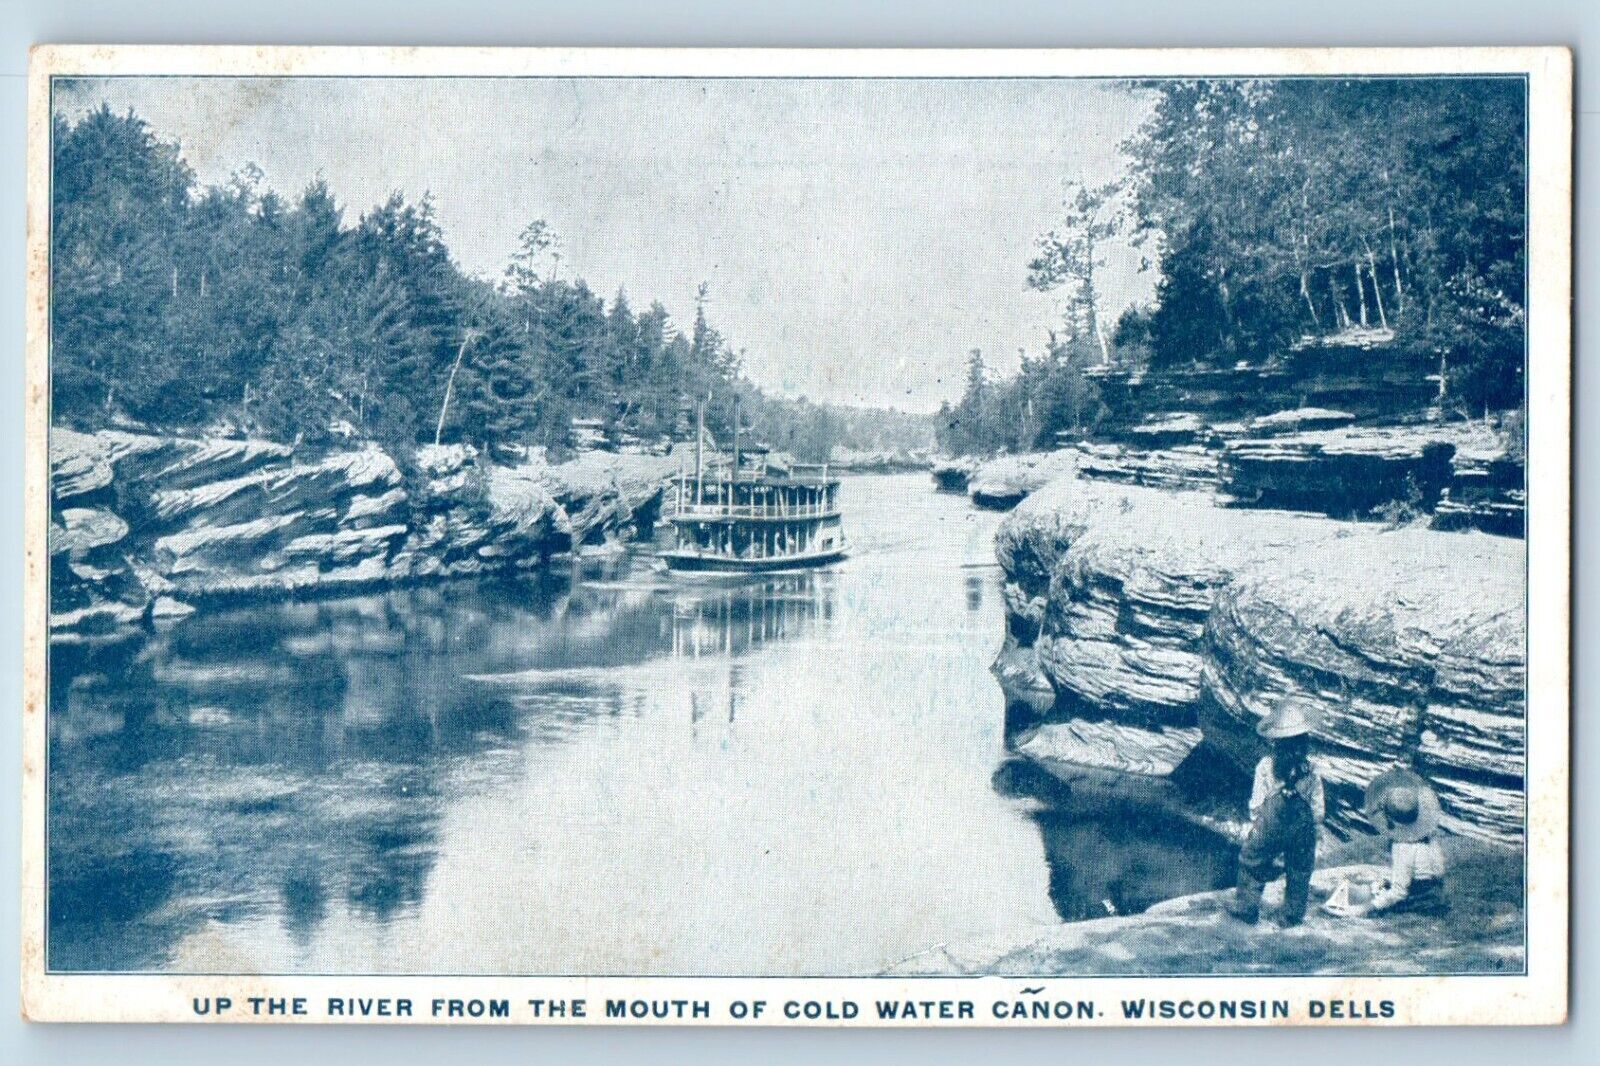 Wisconsin Dells Wisconsin WI Postcard Up The River Mouth Cold Water Canon c1905